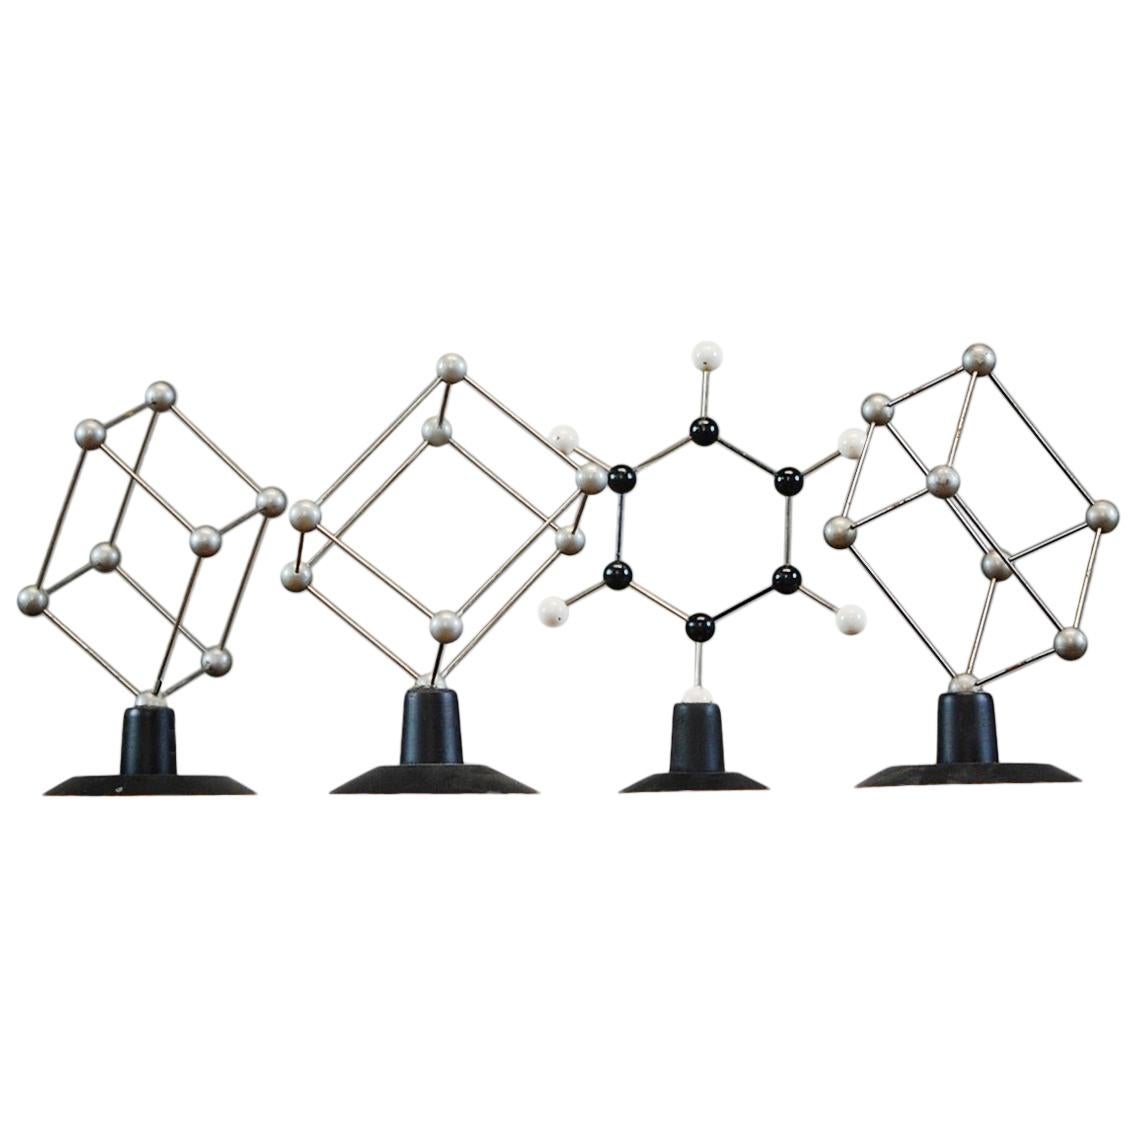 Collection of Four Educational Atom Models